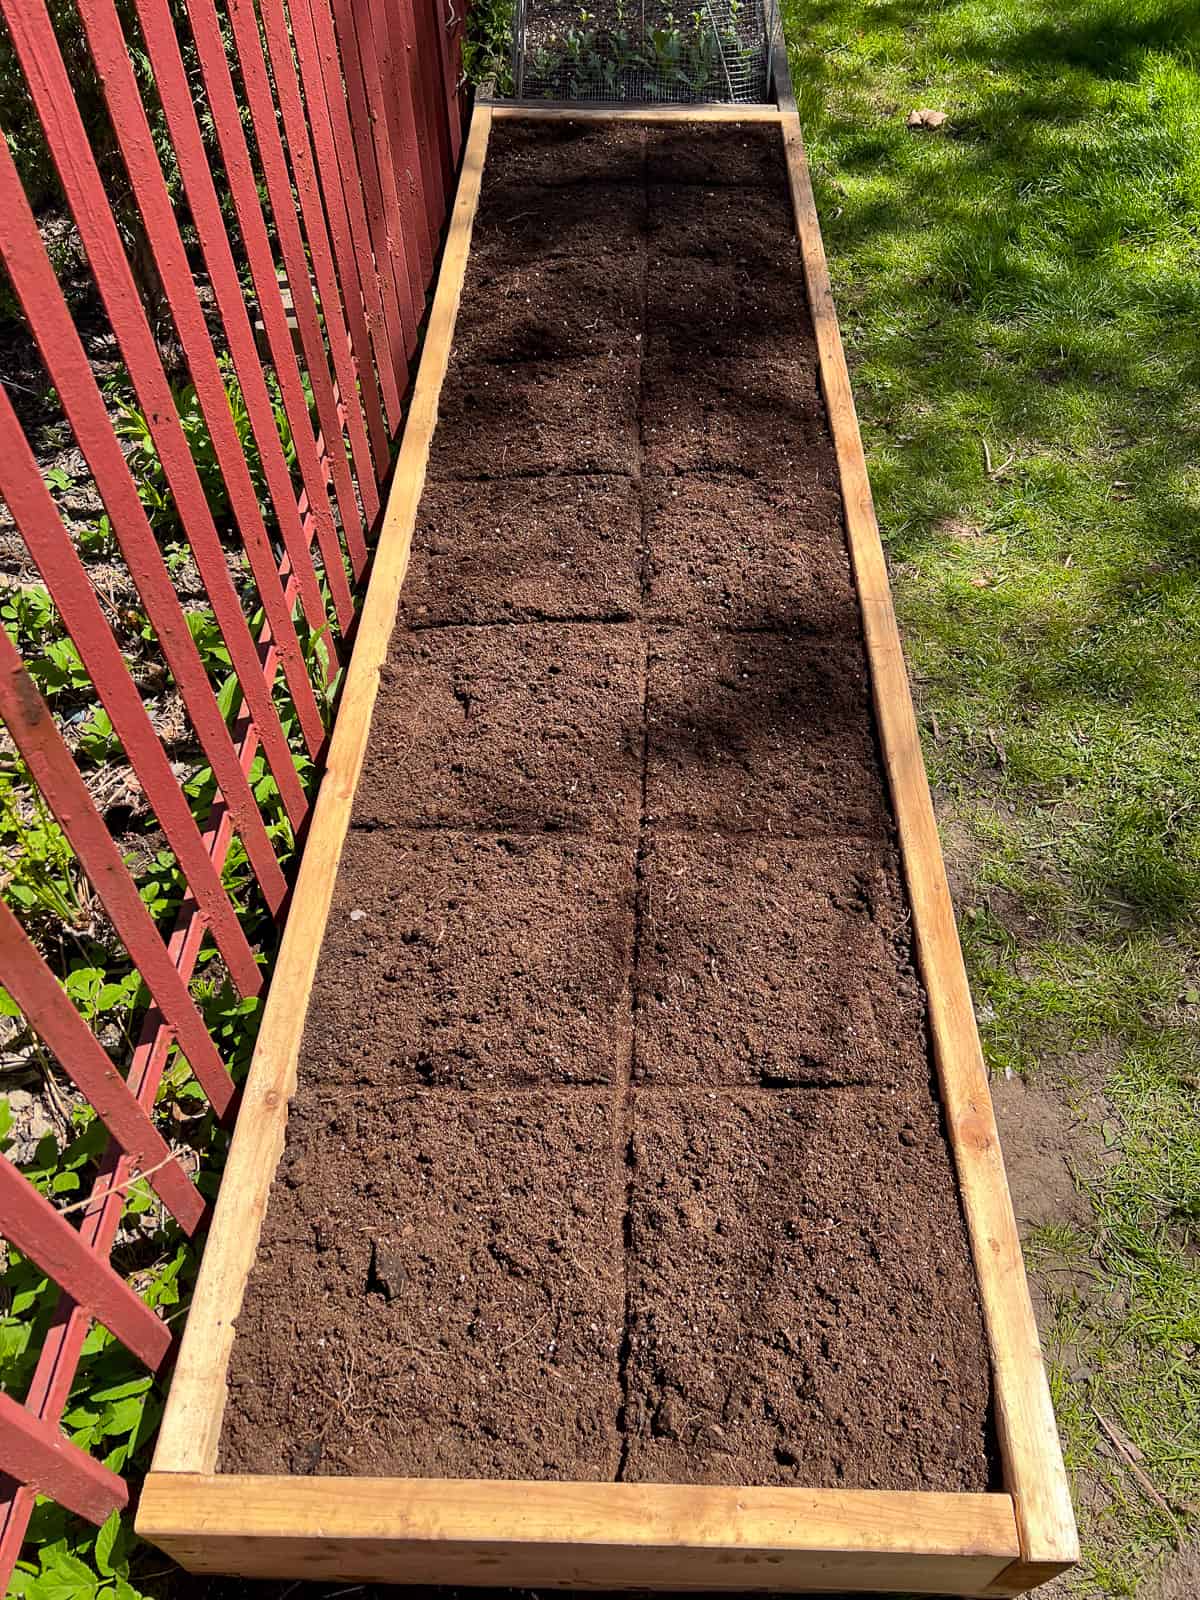 An image of a raised bed filled with soil and divided into square foot plots as part of the Square Foot Garden method.